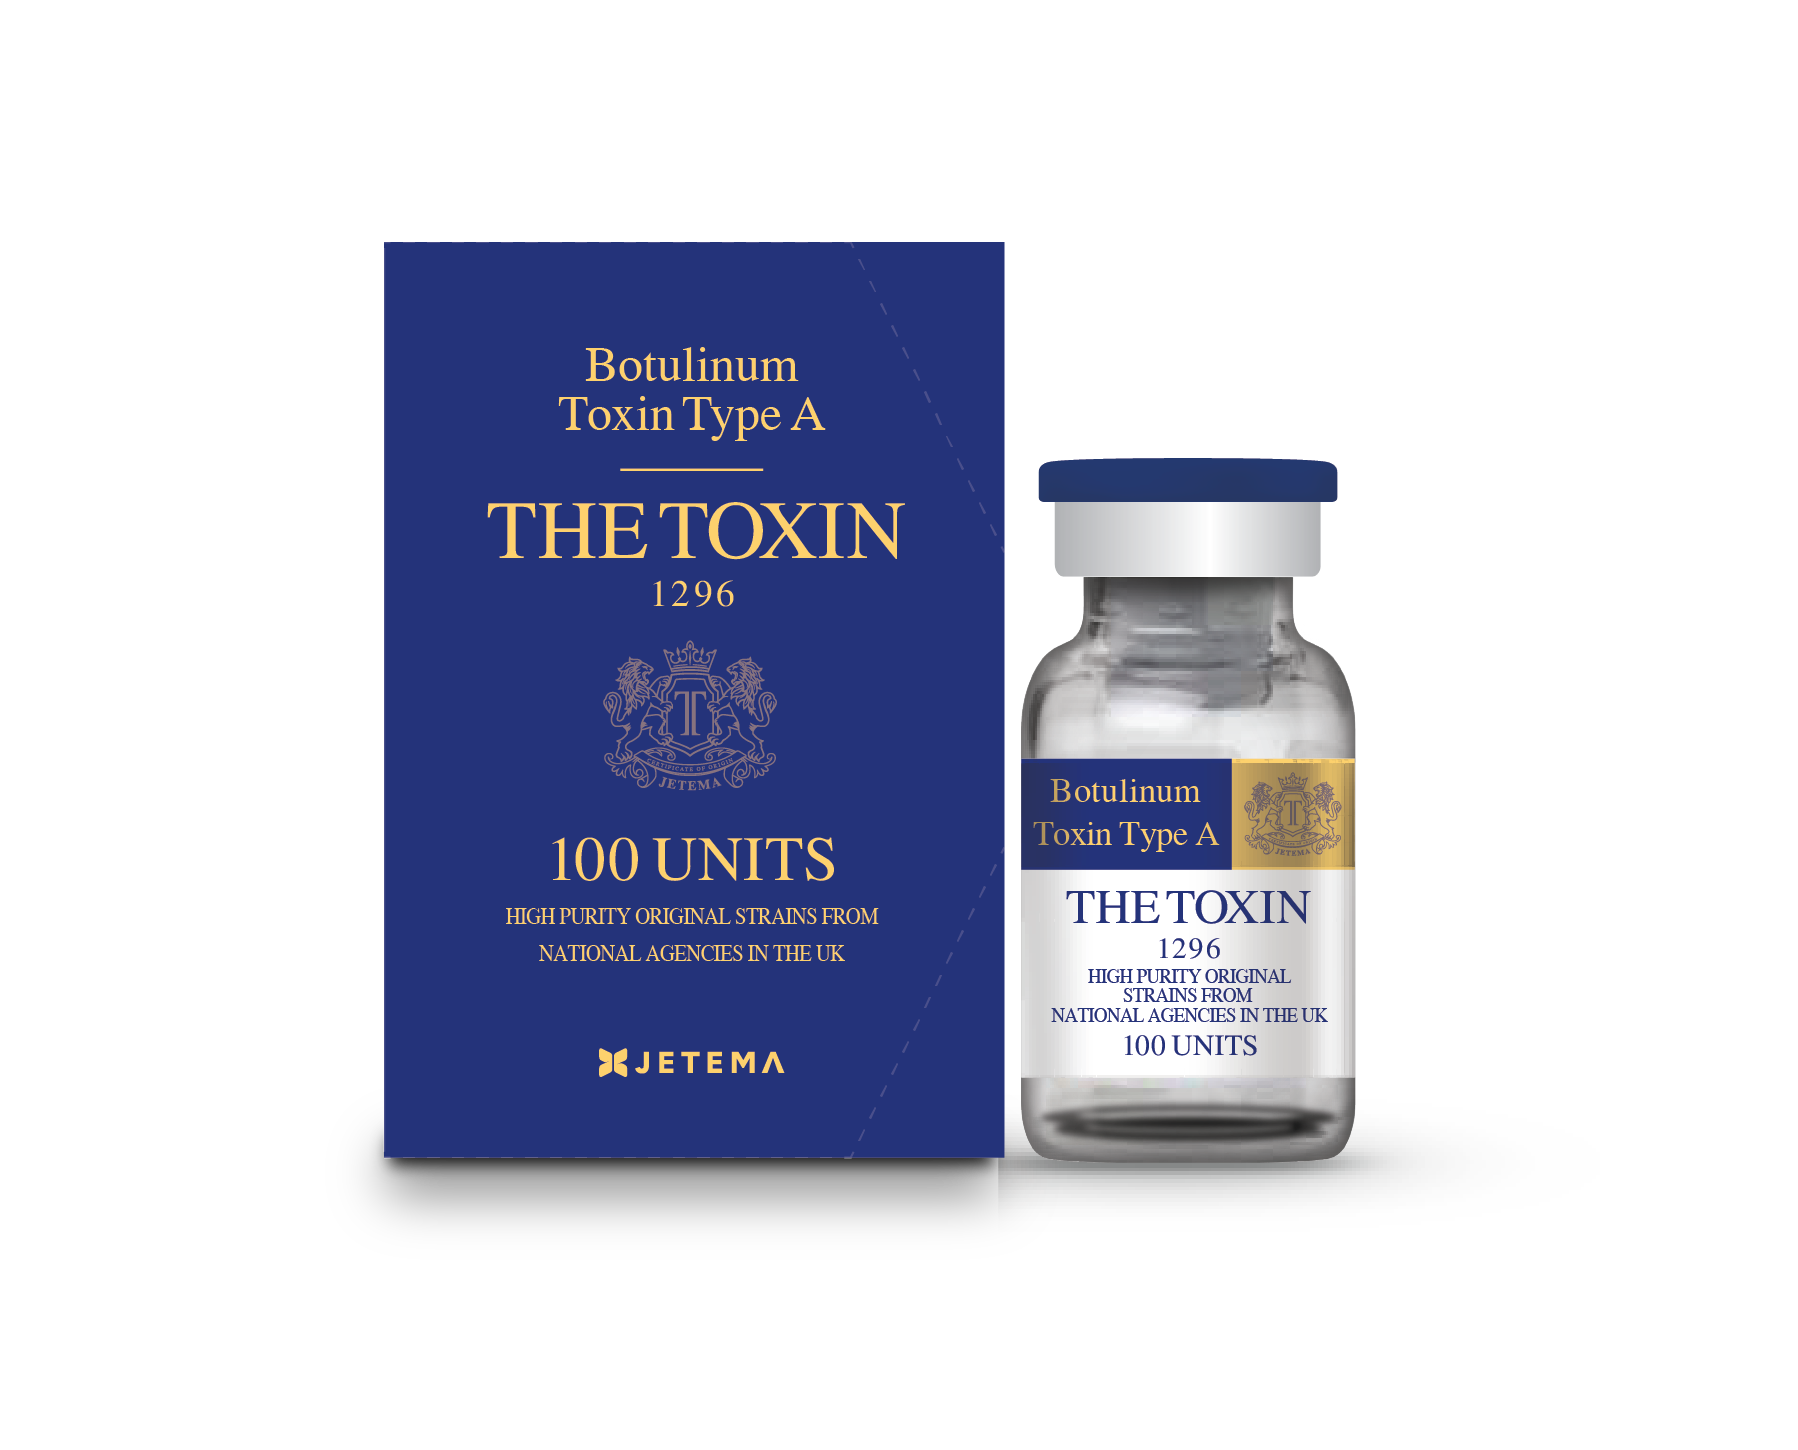 The Toxin